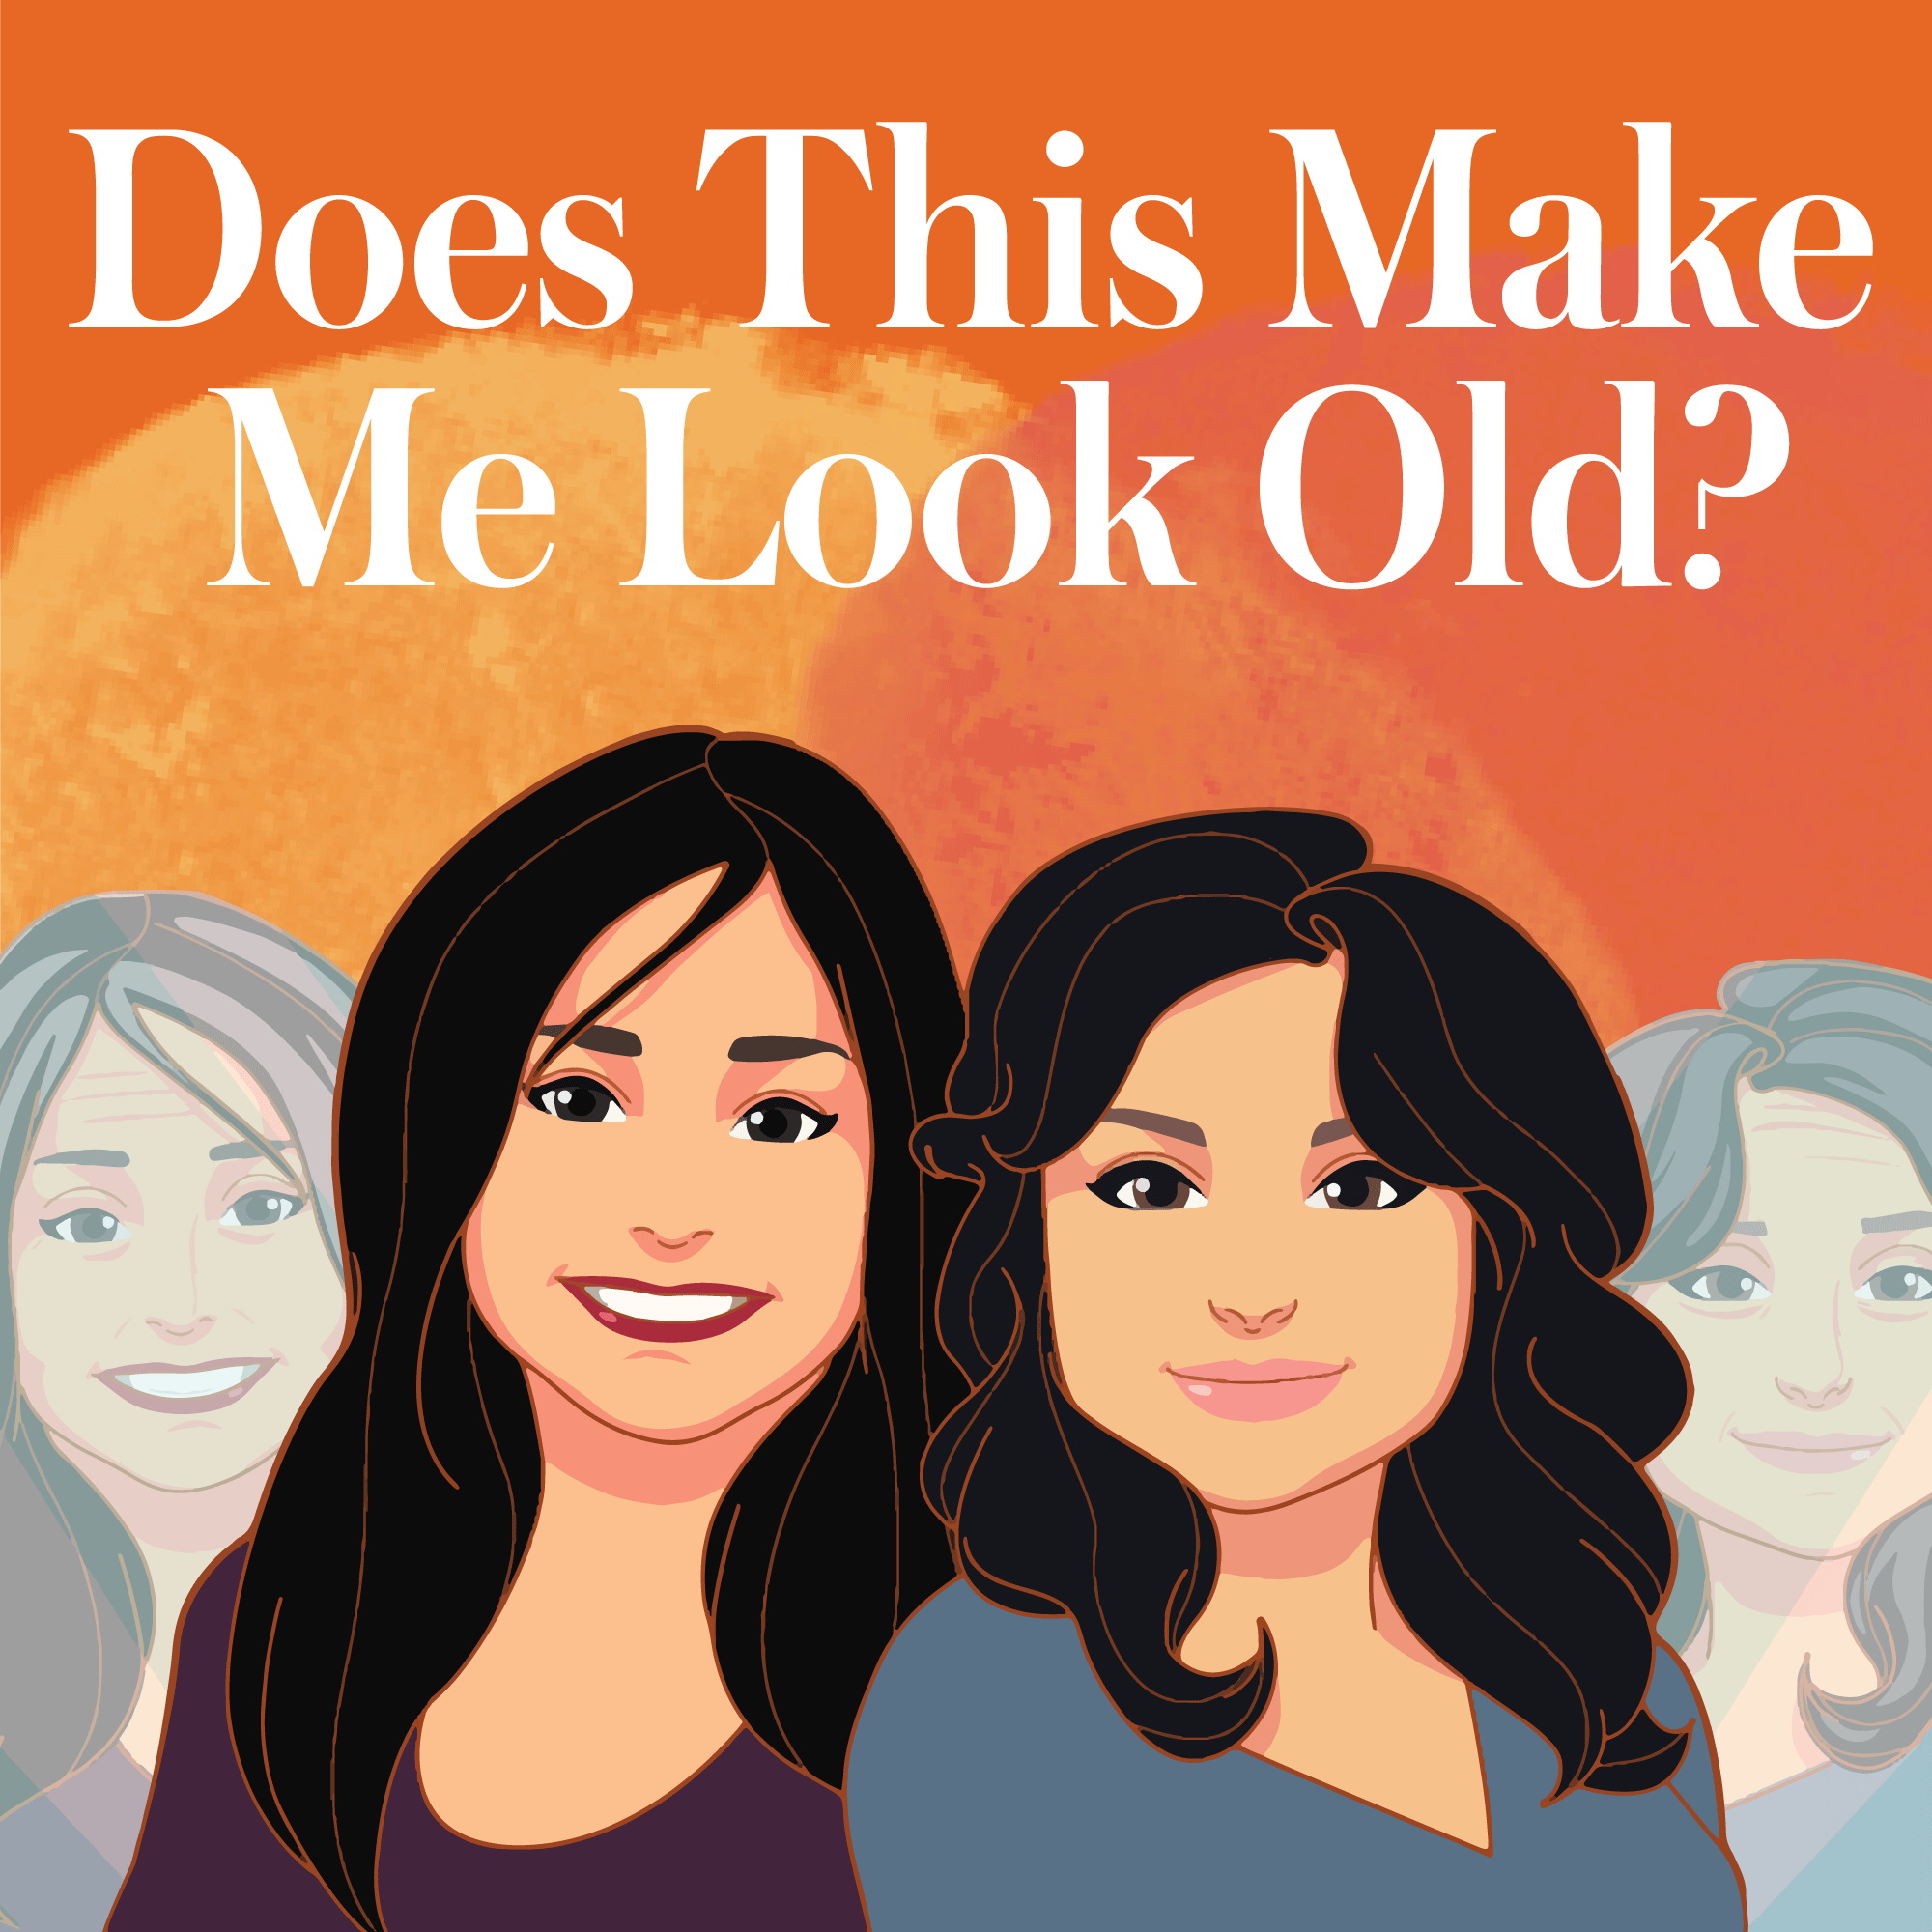 Episode 38: Two sides of being sexy when older